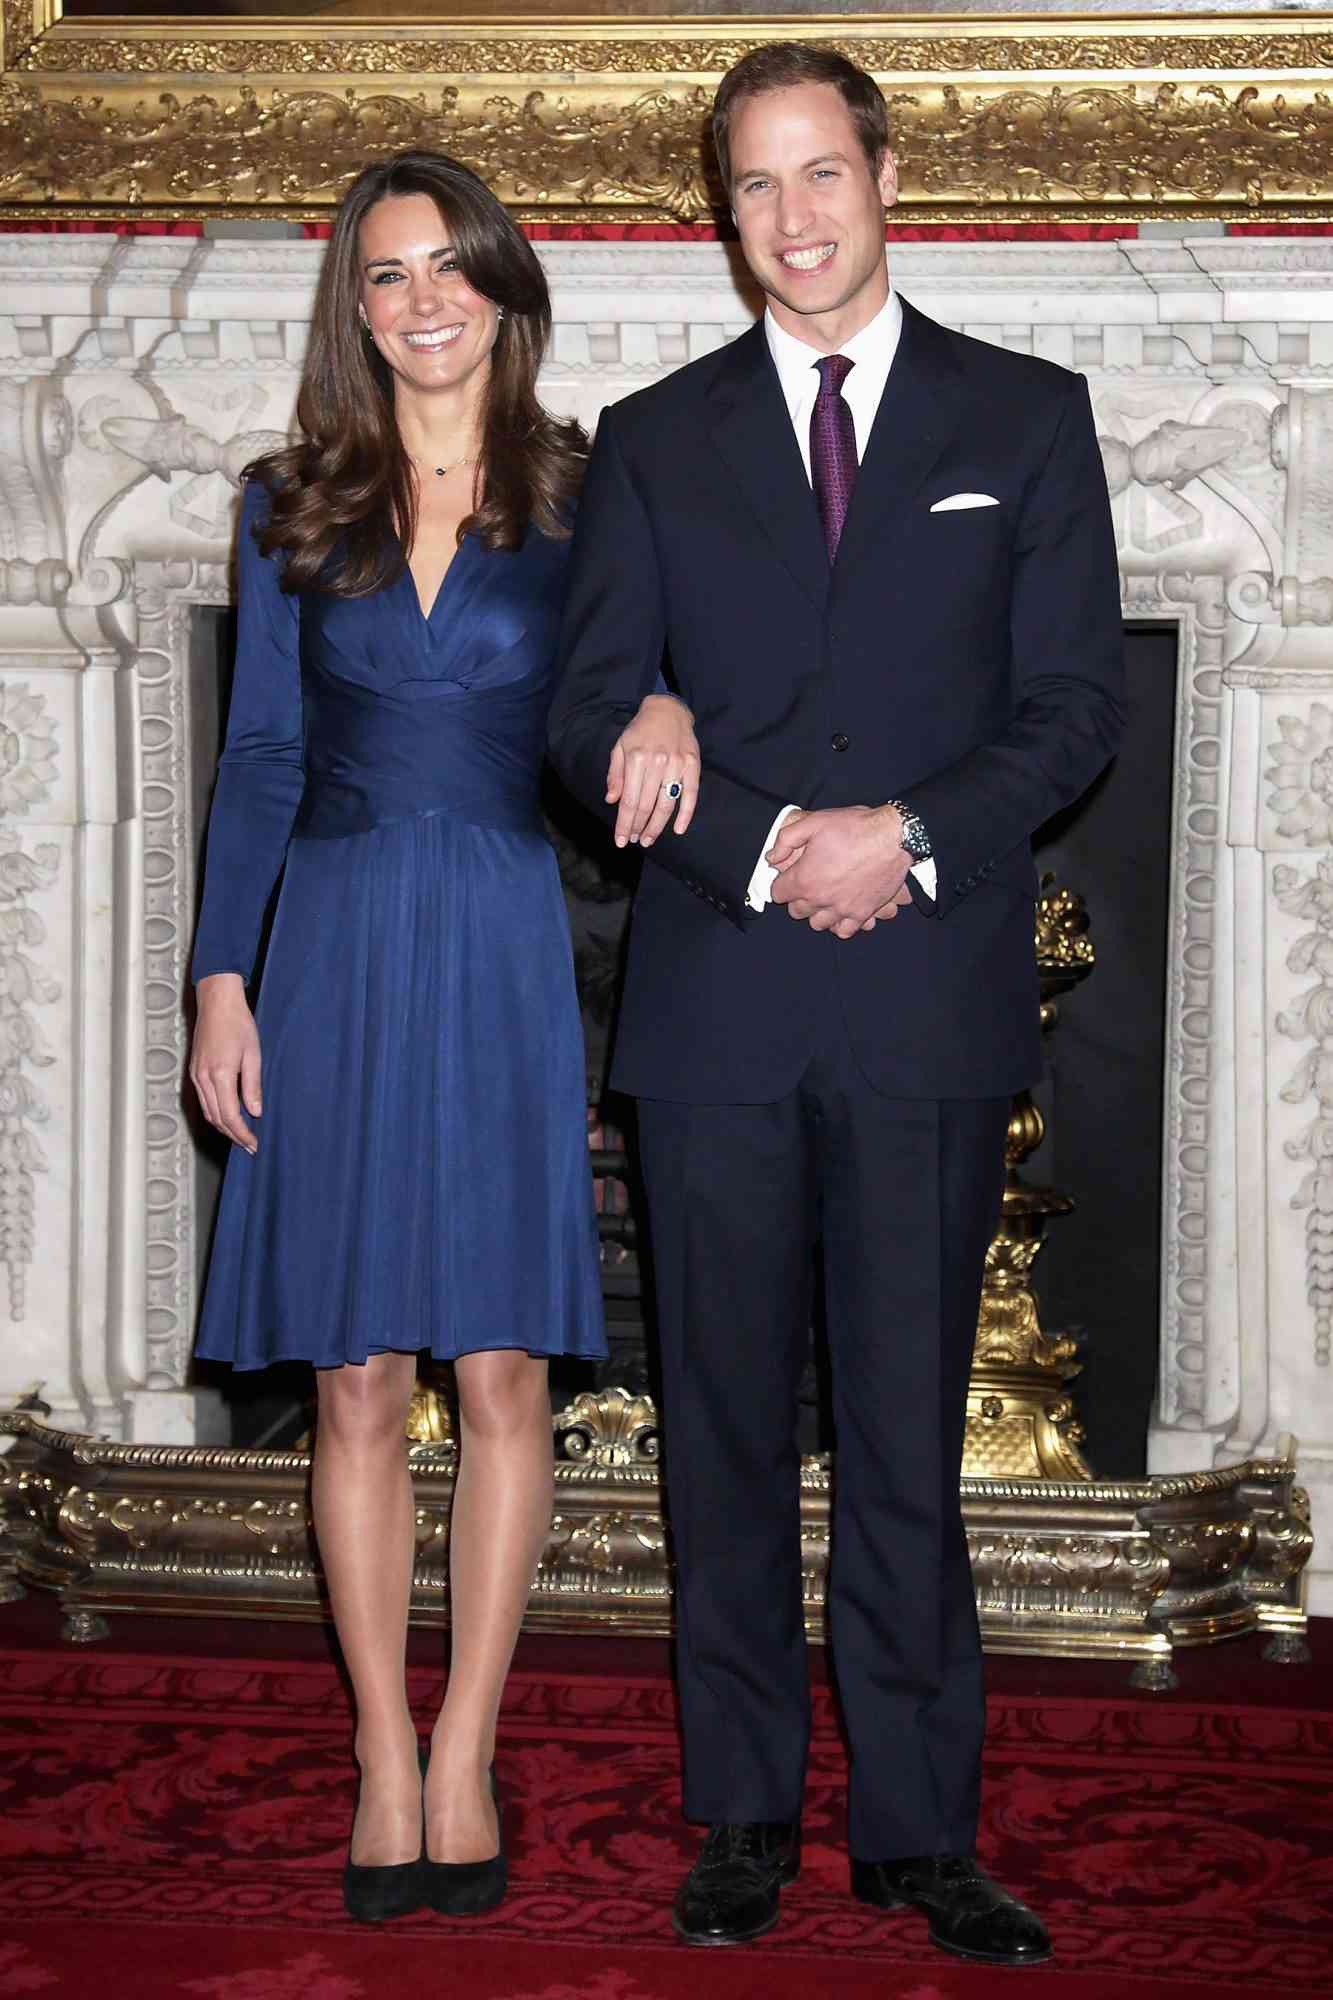 2010: William and Kate&rsquo;s Royal Engagement